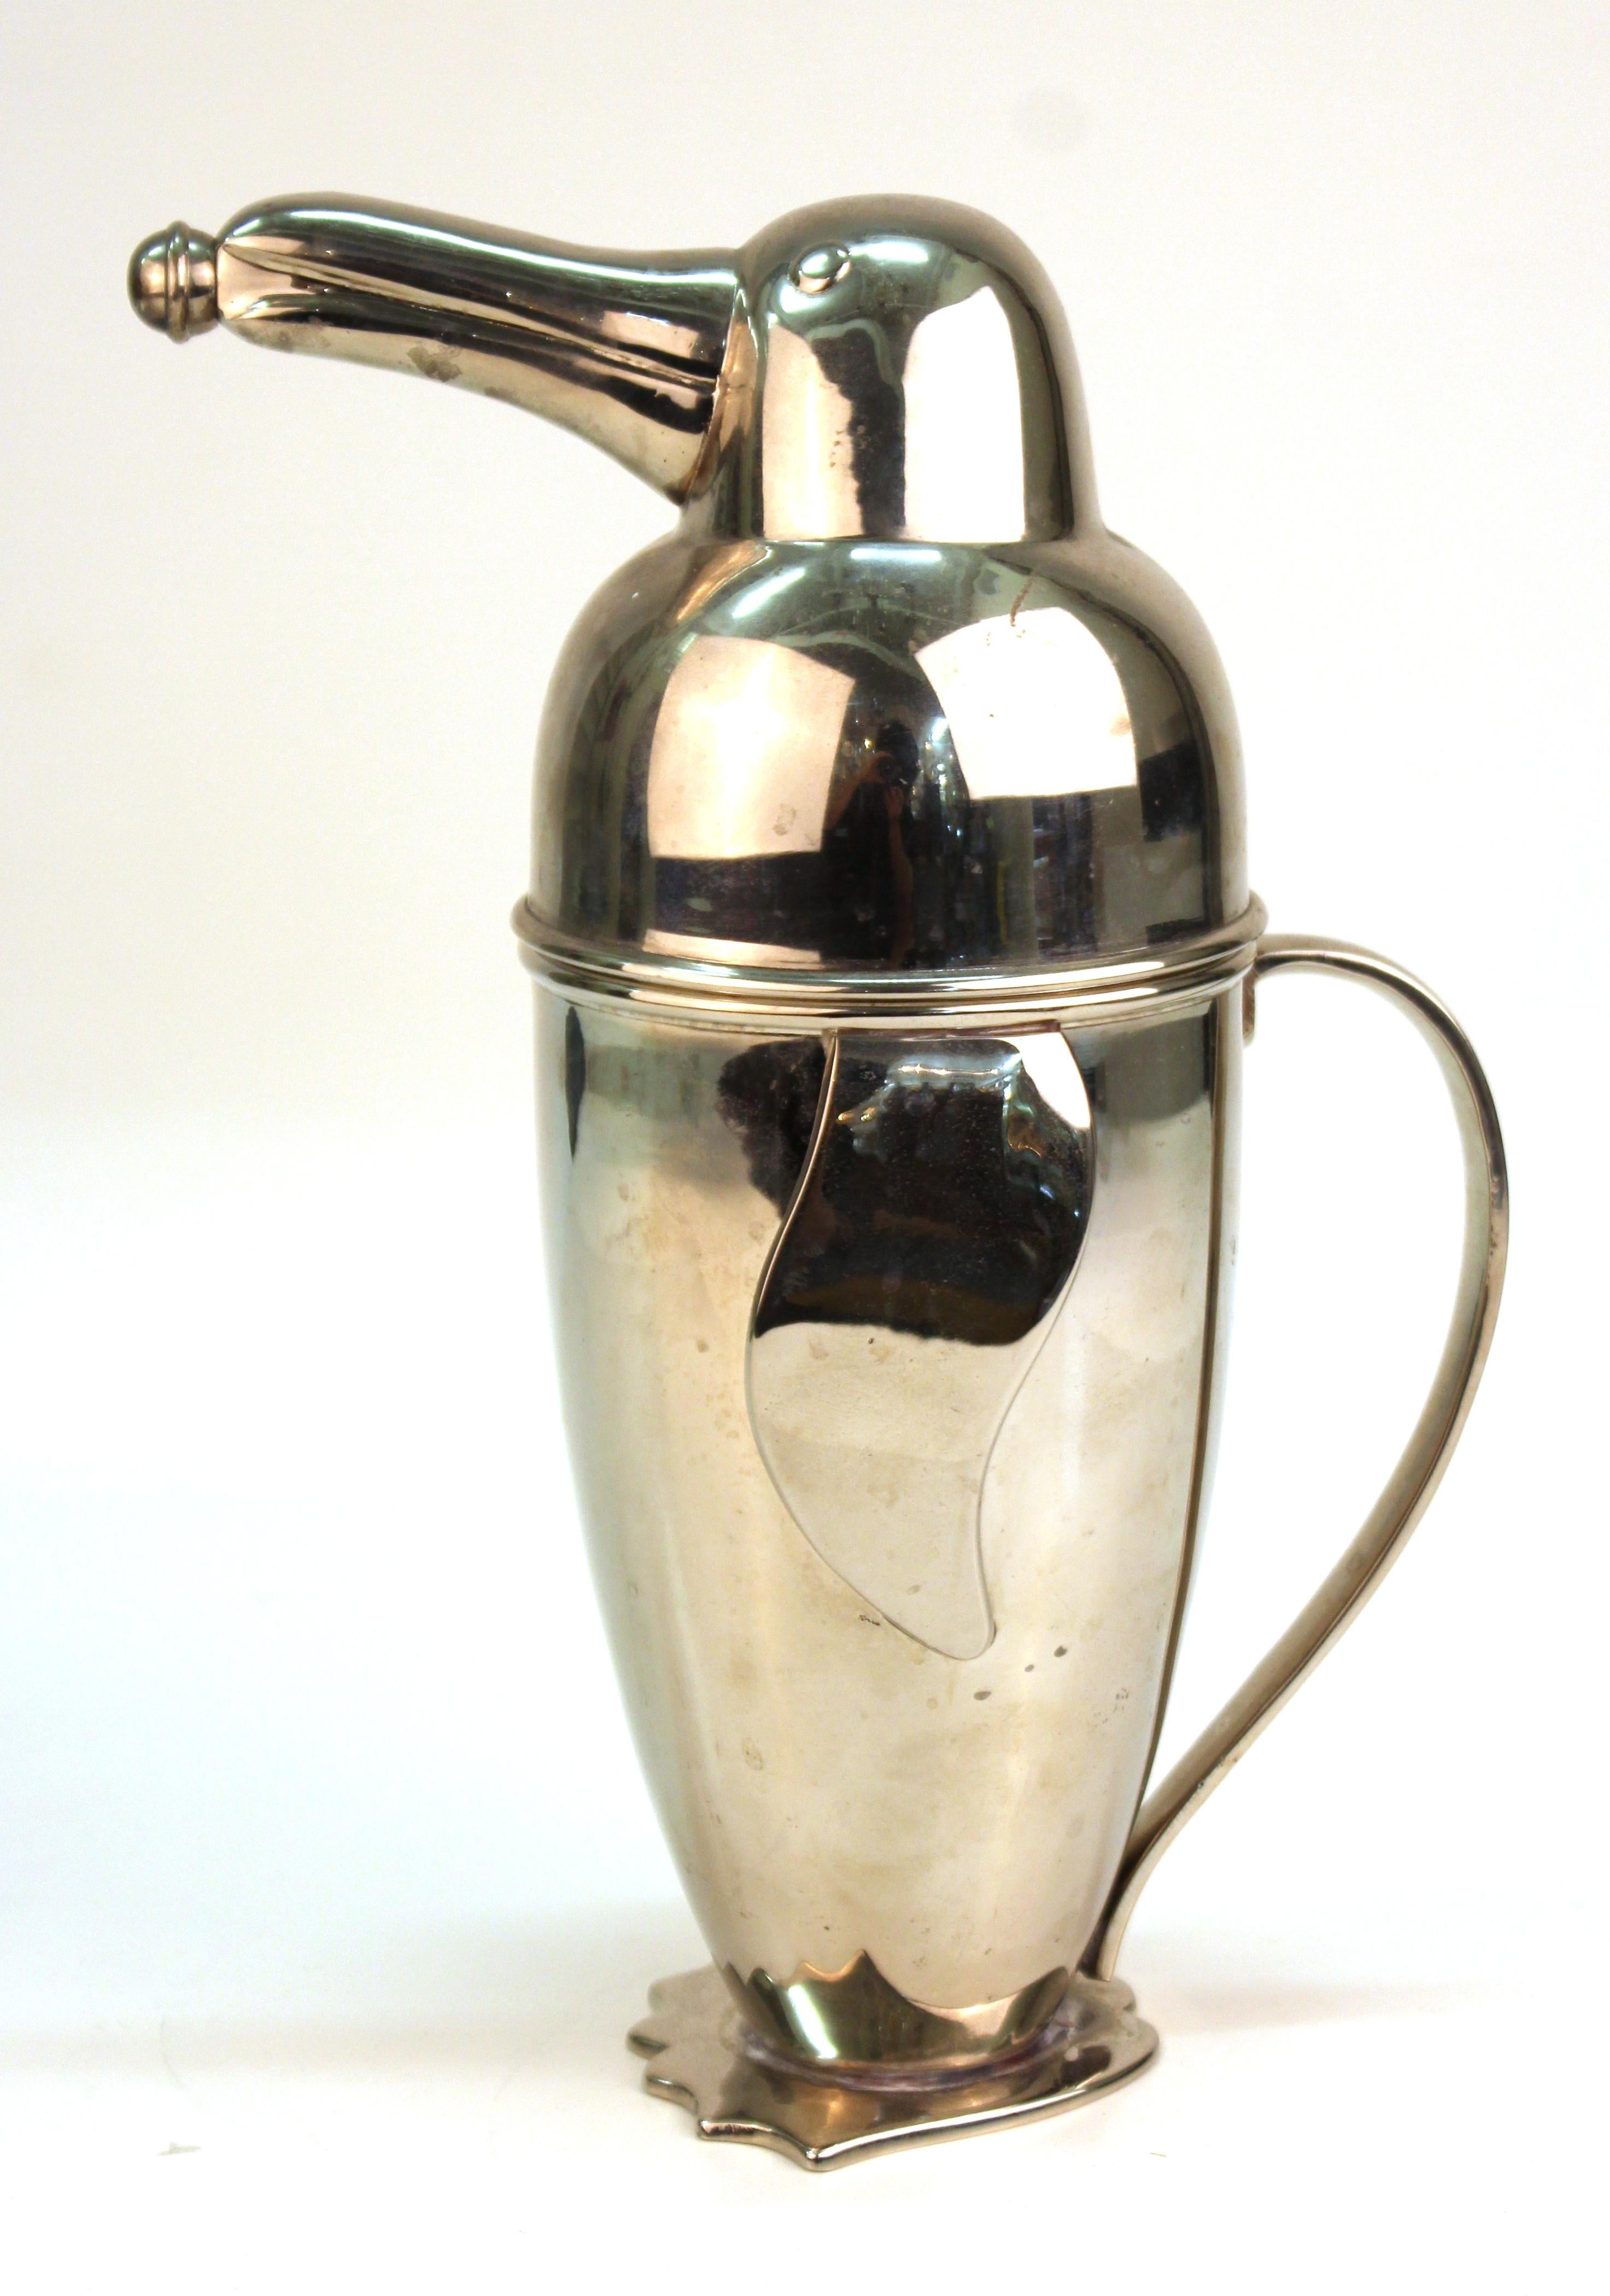 Napier style cocktail shaker in shape of a penguin, made in stainless steel. The piece is in good vintage condition with age-appropriate wear.